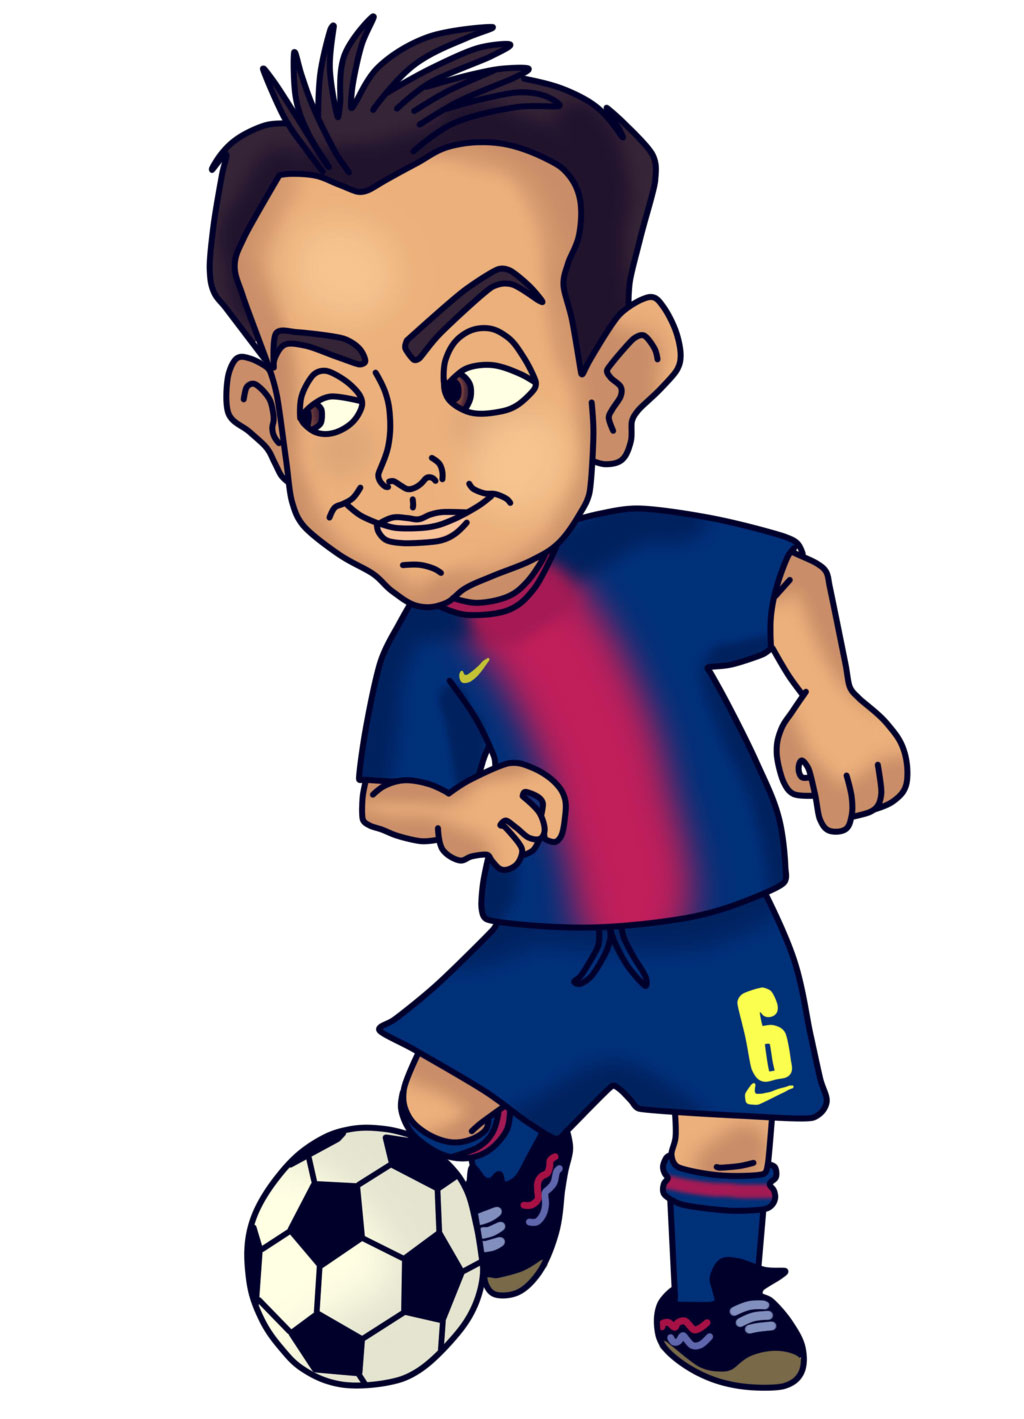 Funny Football Cartoon Pictures - ClipArt Best